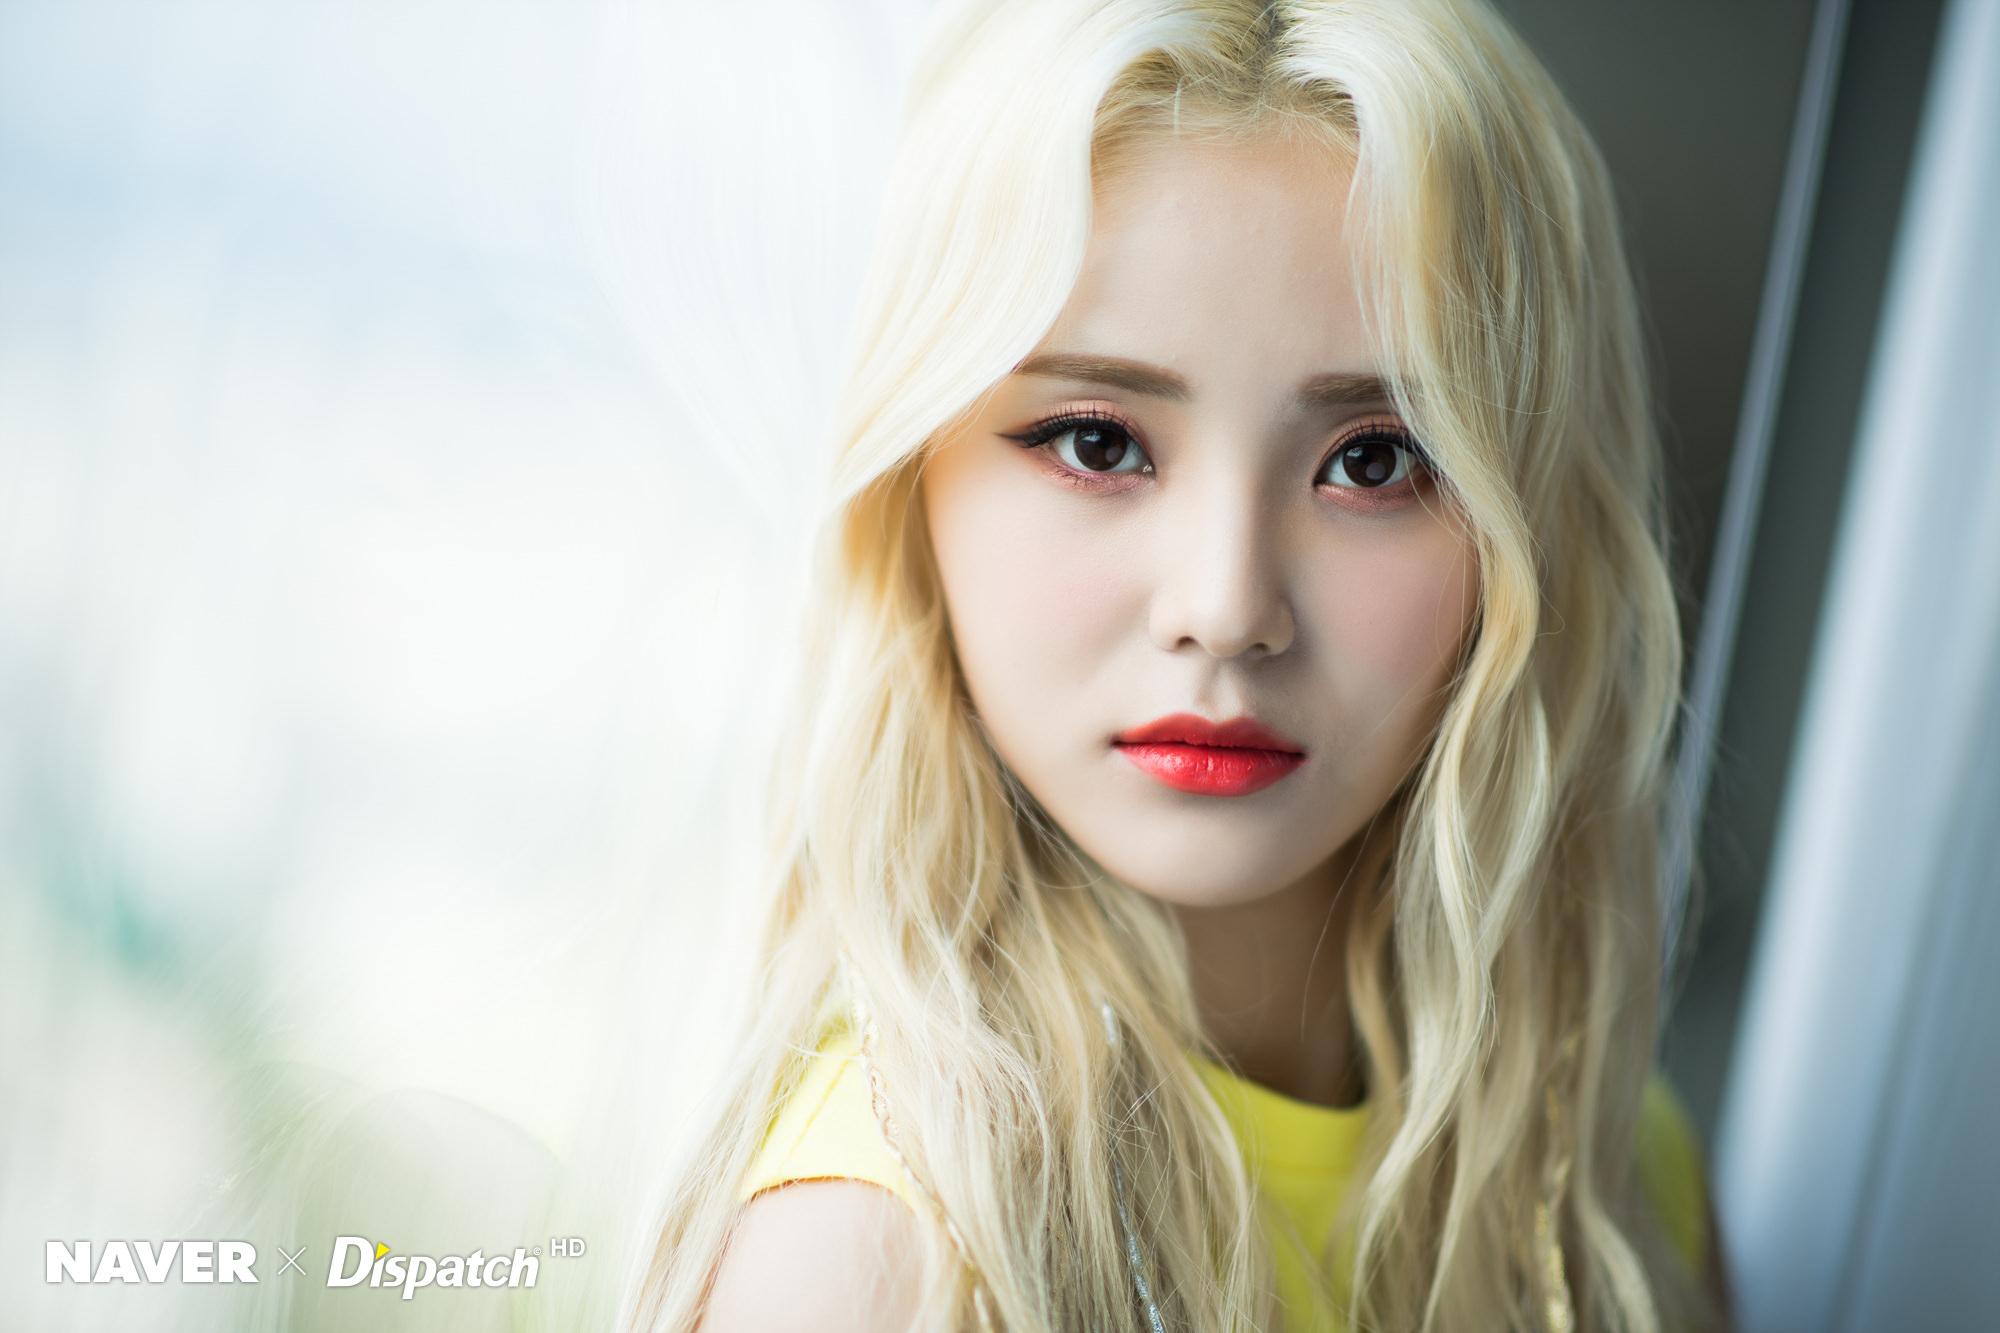 Loona - JinSoul Naver x Dispatch 2018 - LOOΠΔ achtergrond (41540832 ...